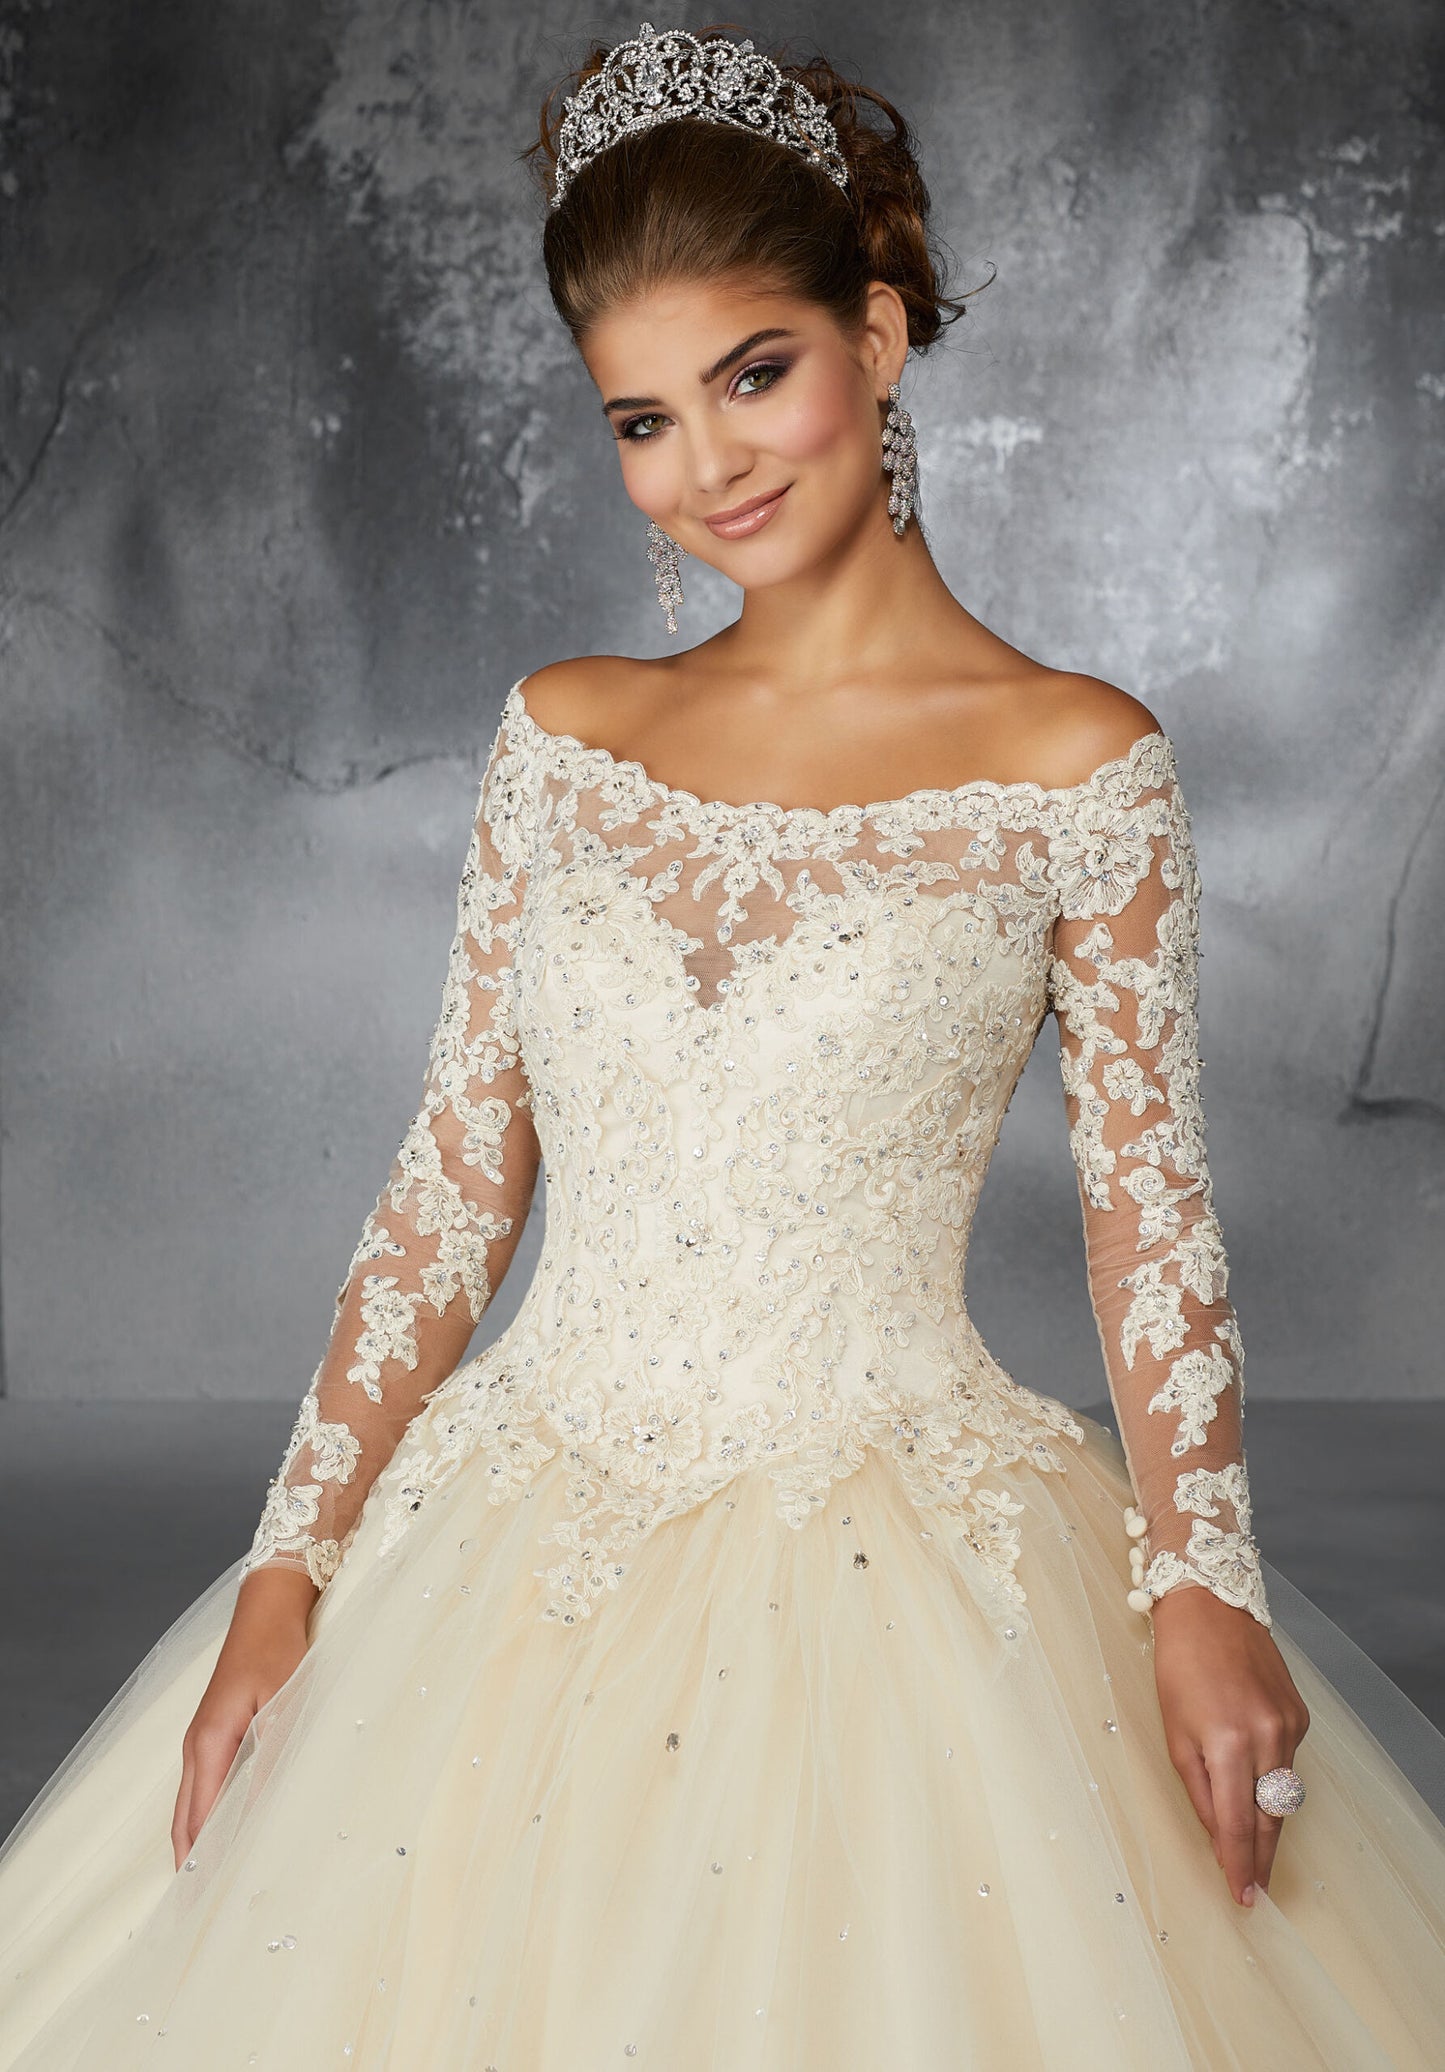 Beaded Lace Appliqués on a Tulle Ballgown Skirt #60052